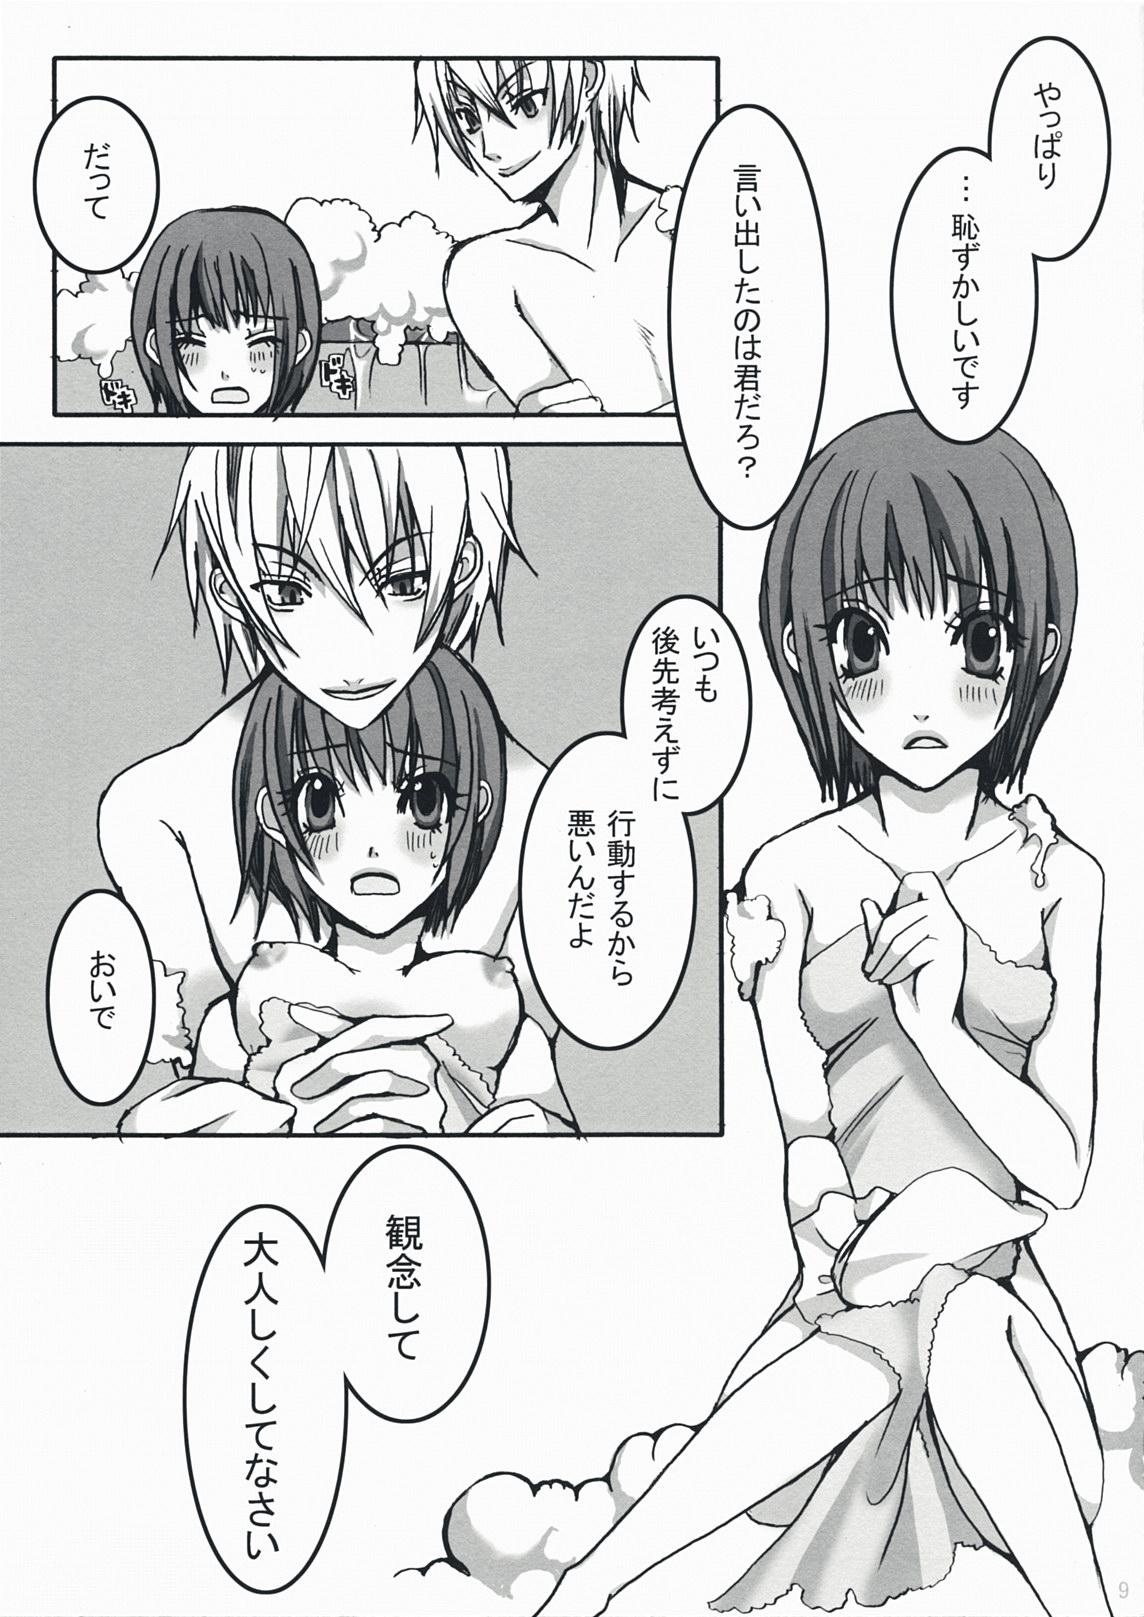 Mama Kiss The Girl - Liar game Exhibitionist - Page 8